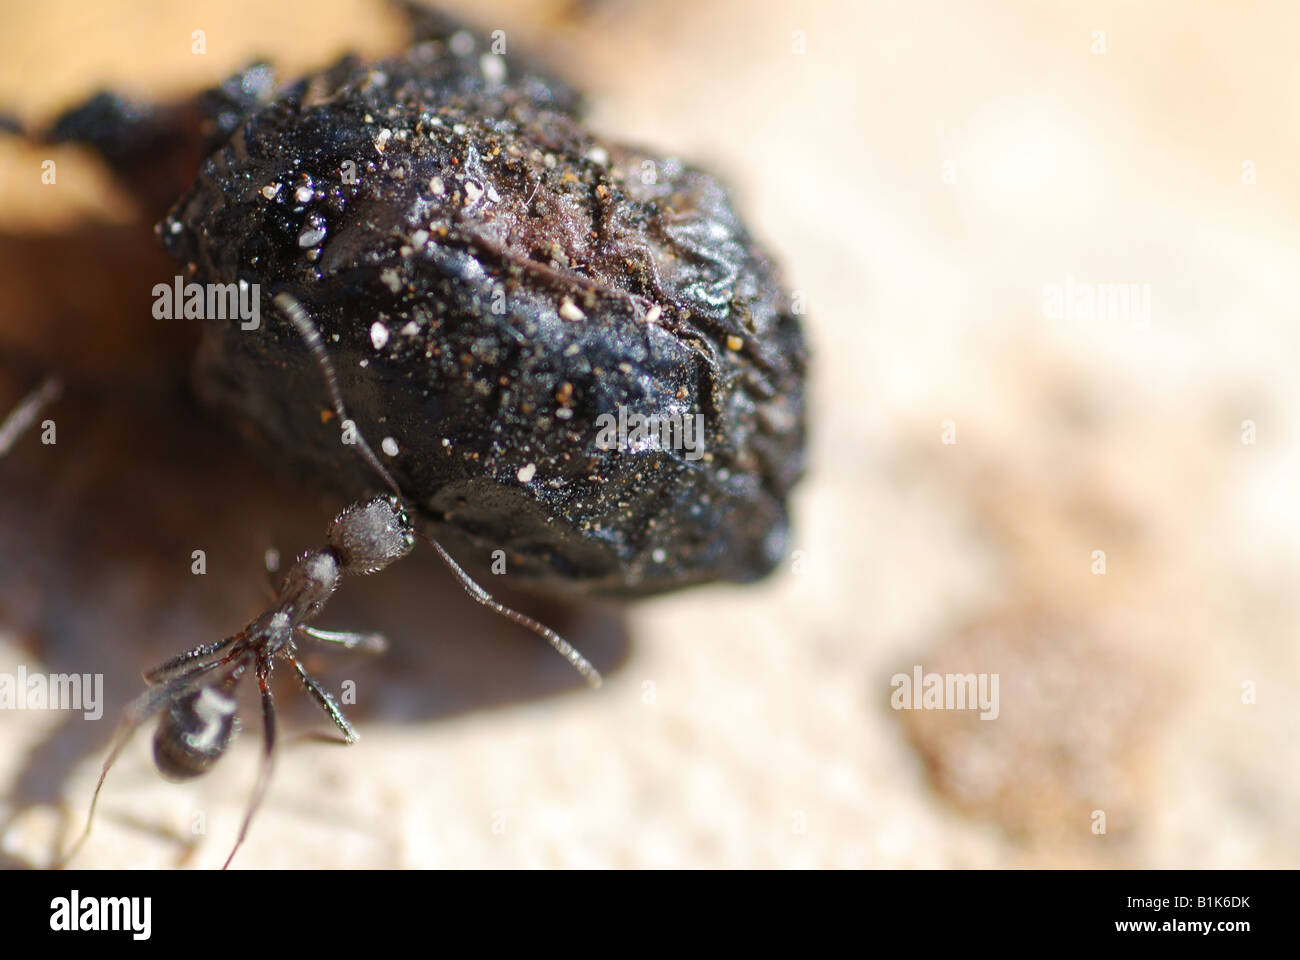 Ants close up lifting an olive pip Stock Photo